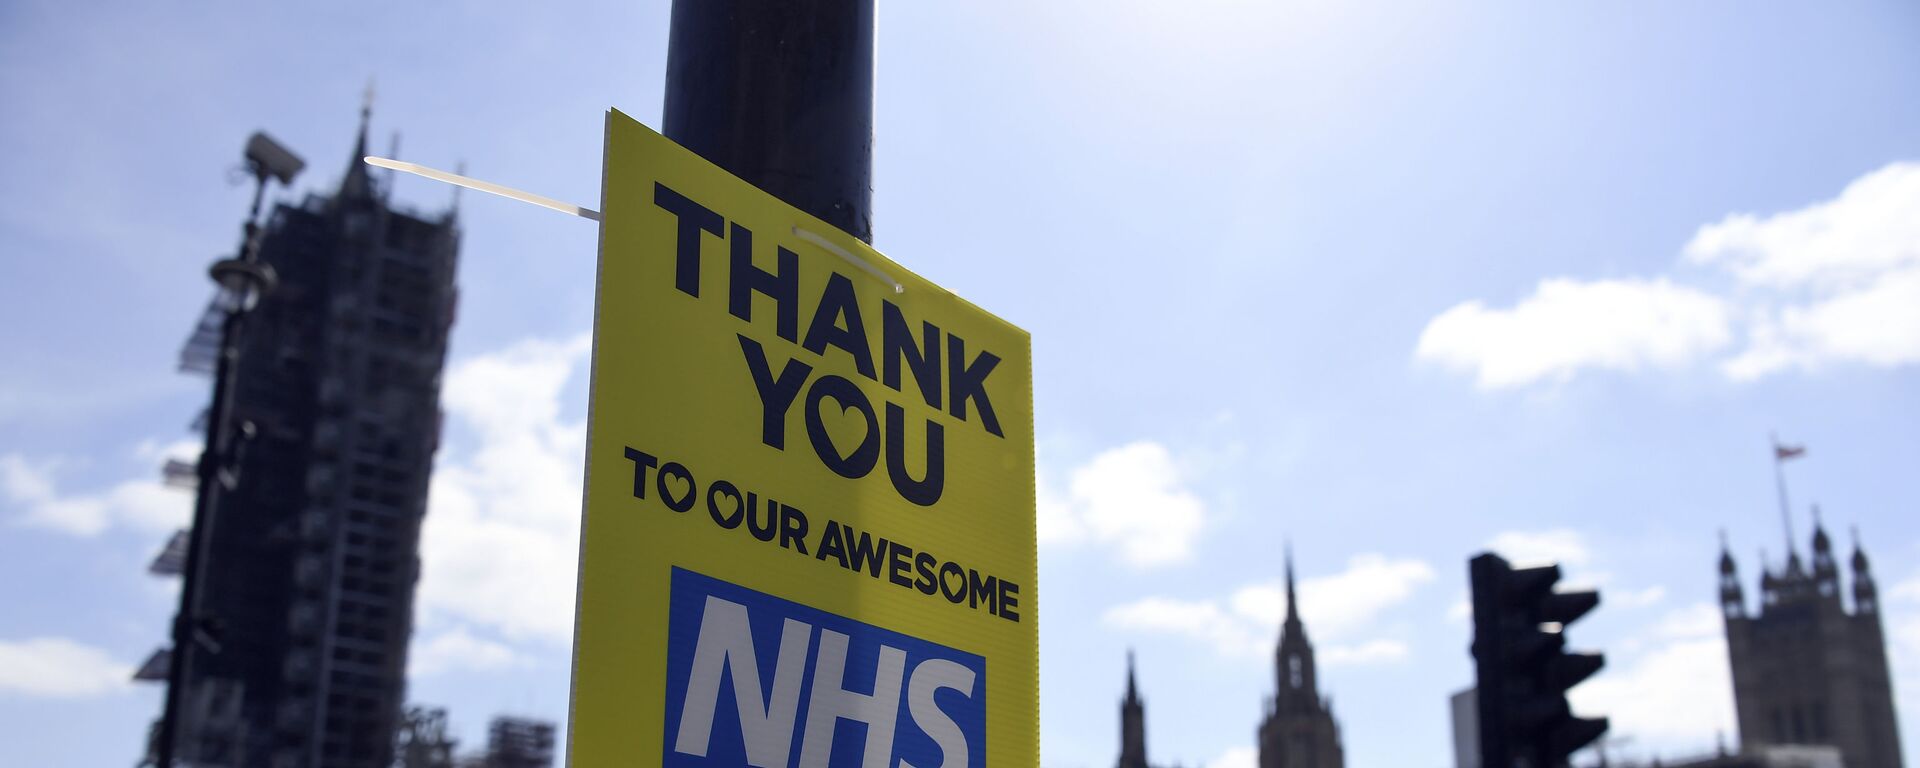 A message in support to the NHS is seen in Westminster, during to the Coronavirus outbreak, in London, Tuesday, April 14, 2020 - Sputnik International, 1920, 24.07.2022